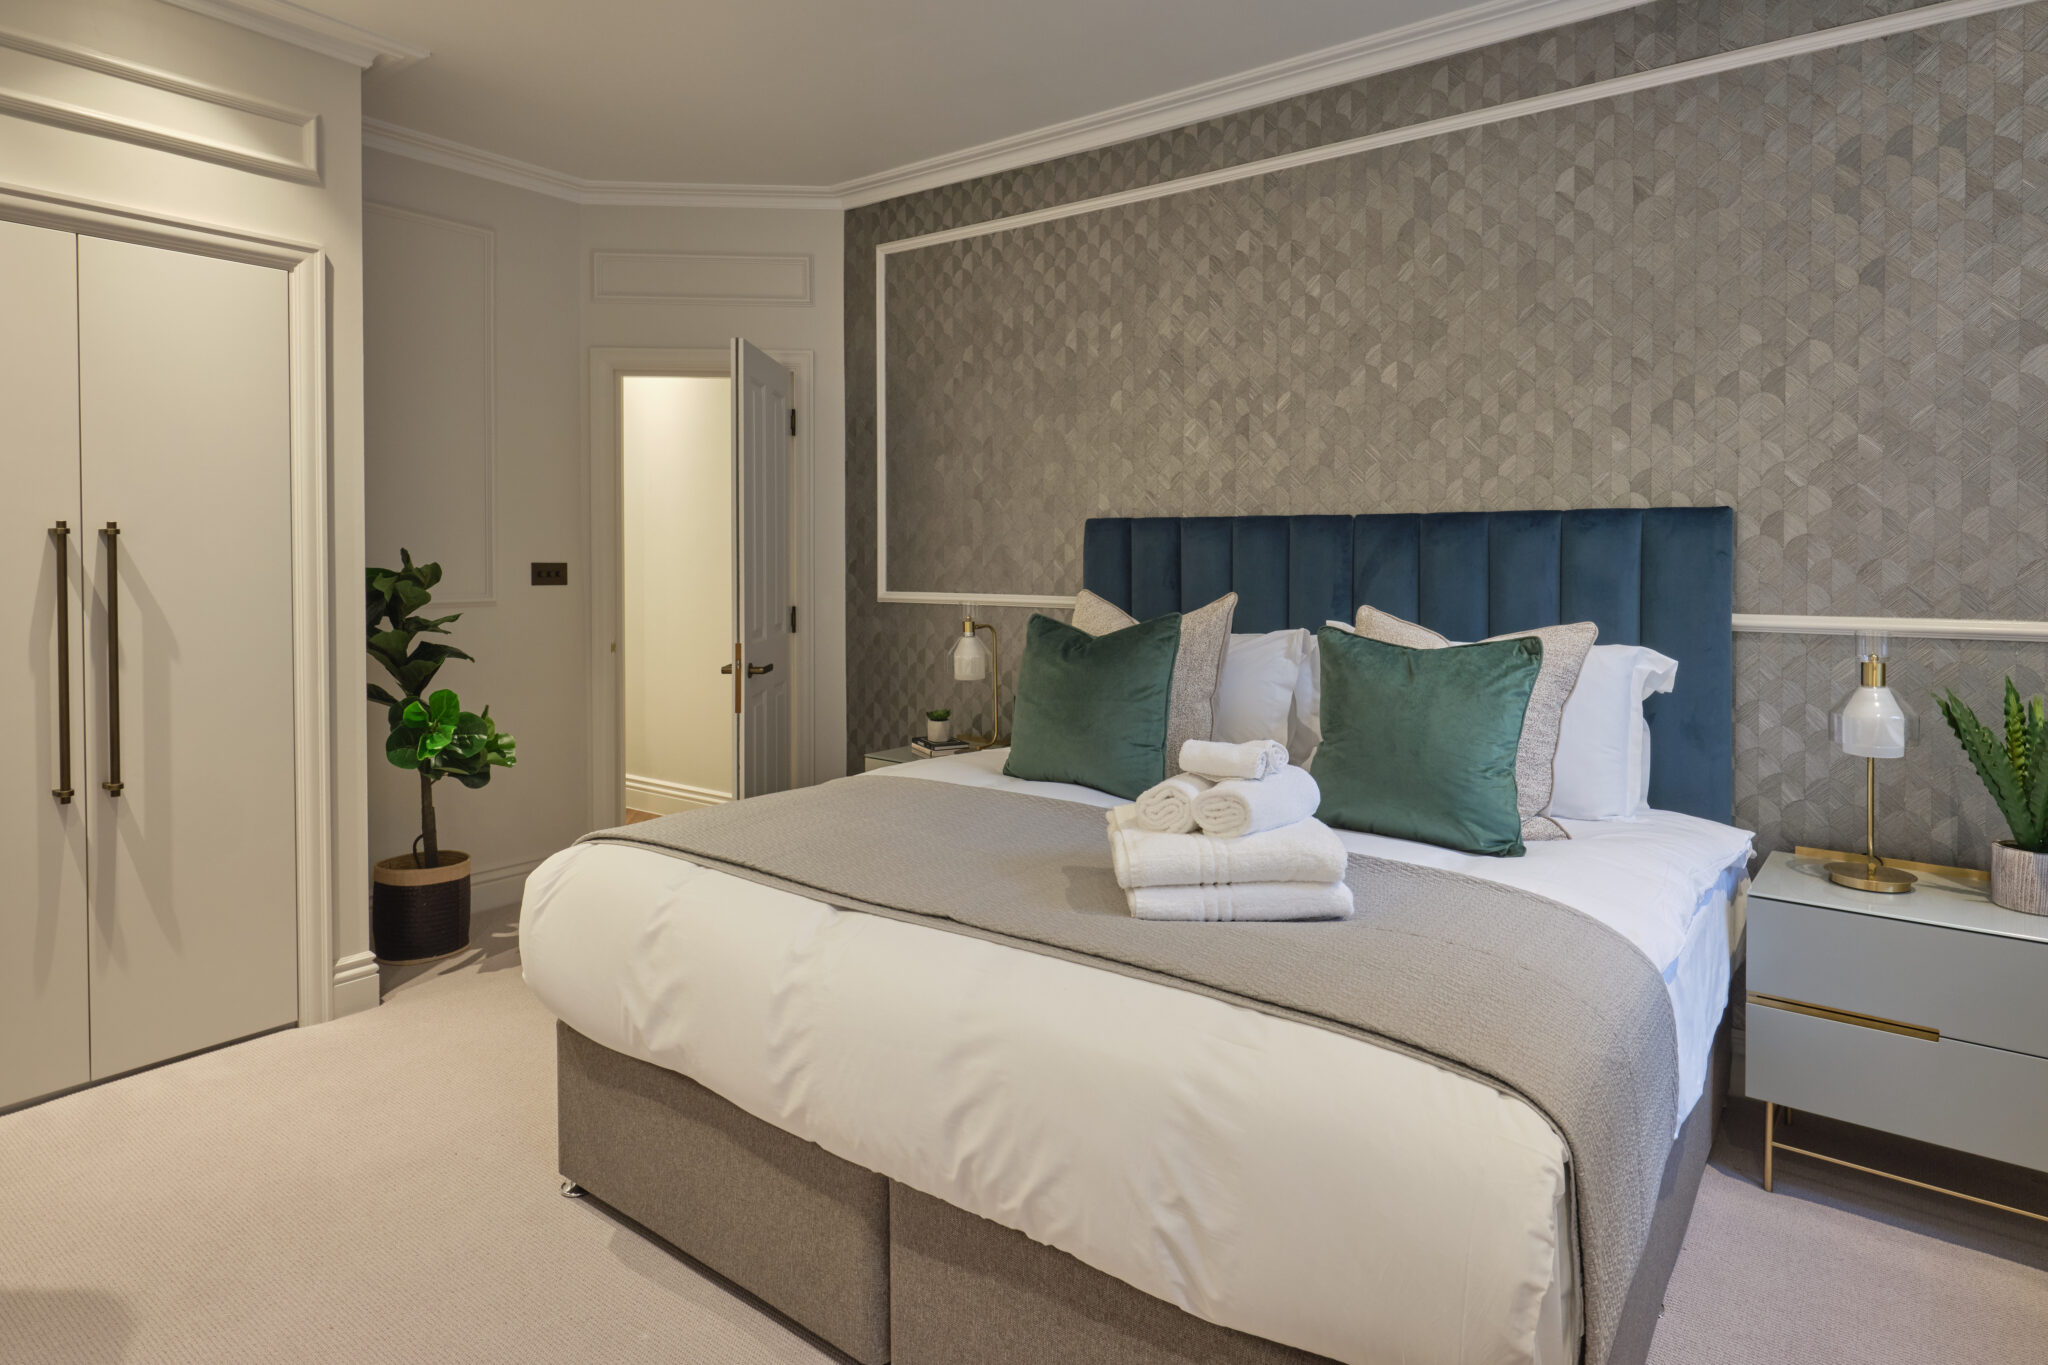 Luxury Mayfair Serviced Accommodations Darley House Immaculate interiors,high-end amenities,and prime location and Wi-Fi included as standard. Book Now With Urban Stay